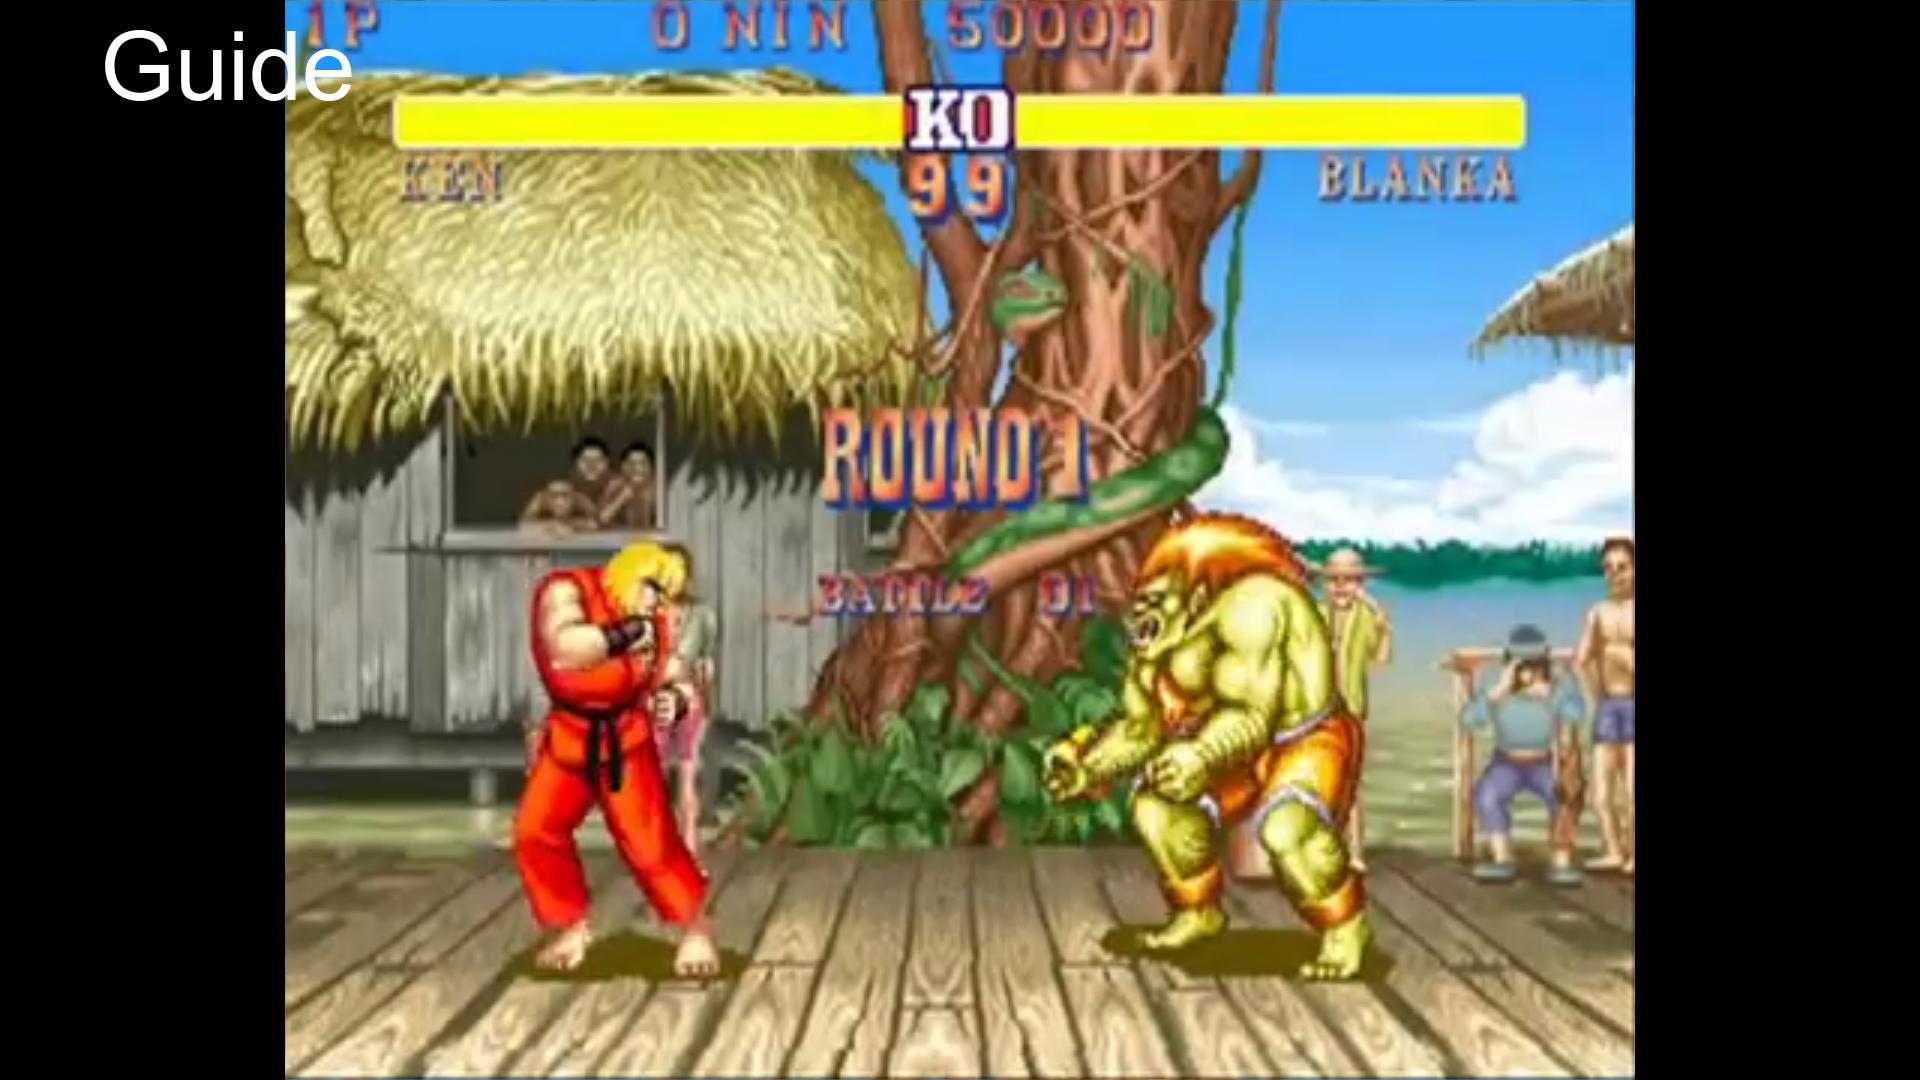 Guide for Street Fighter II(ARCADE) for Android - APK Download